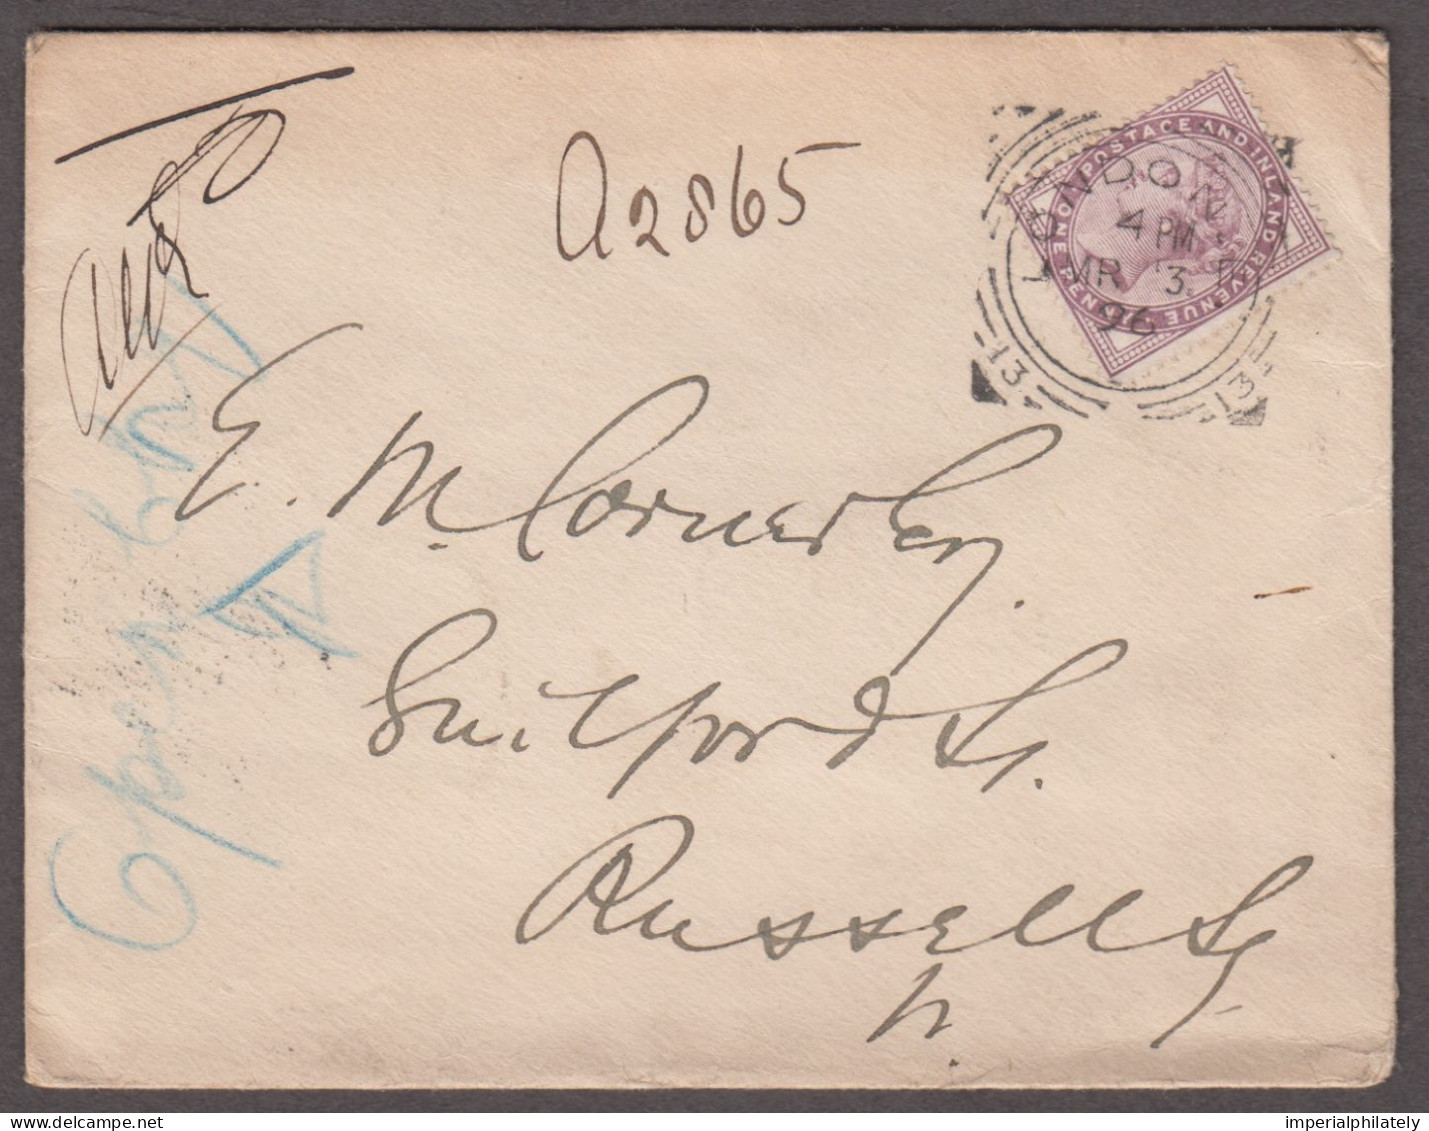 1896 (Mar 3) Envelope With 1881 1d Lilac Tied By London "13" Squared Circle, Reverse With Officially Sealed Label - Covers & Documents